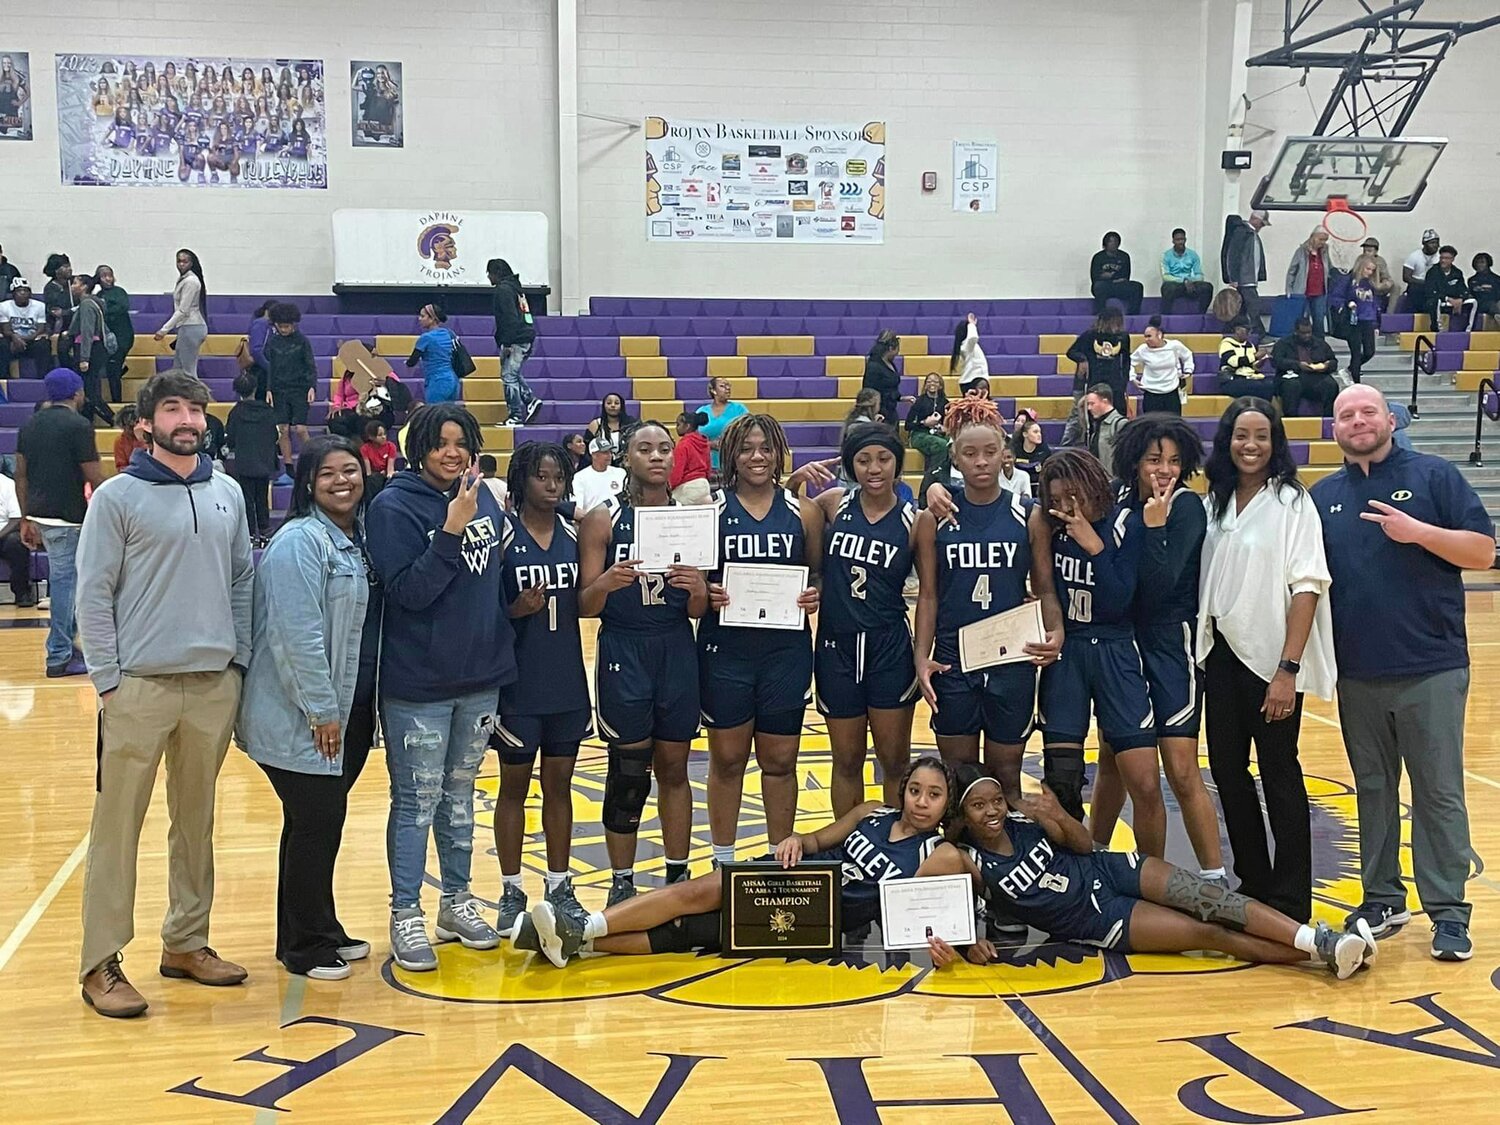 After they went to their first final four last season, this year’s state tournament will start as area champions for the Foley Lions with a 34-32 win over Daphne on Tuesday, Feb. 6. Foley earned its second straight area title with a road victory and is set to host the Central-Phenix City Red Devils in the sub-regional round.